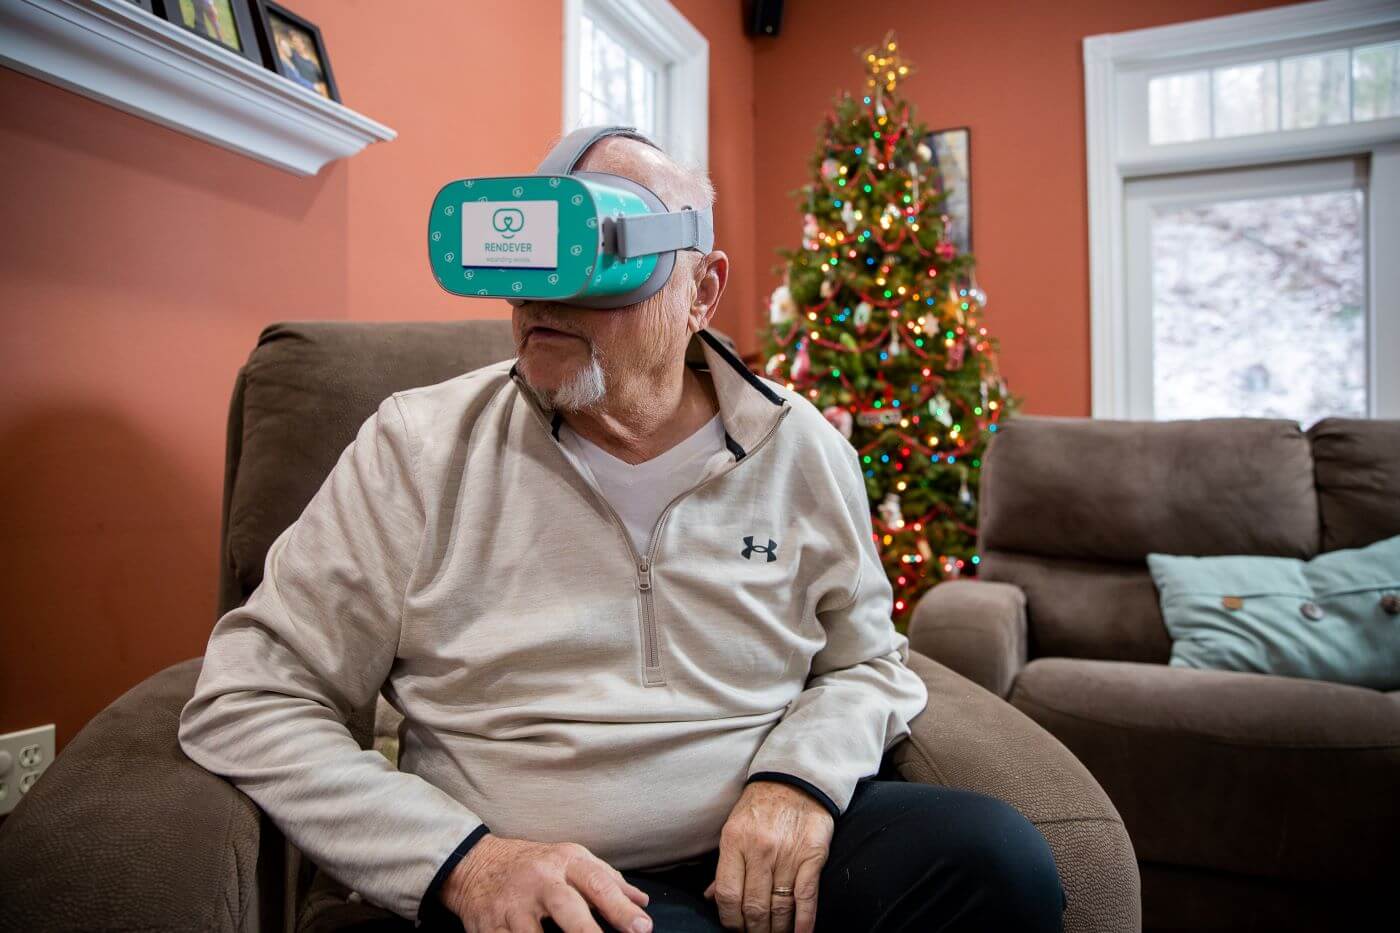 How Rendever and AARP Used Virtual Reality to Grant the Wish of a Lifetime